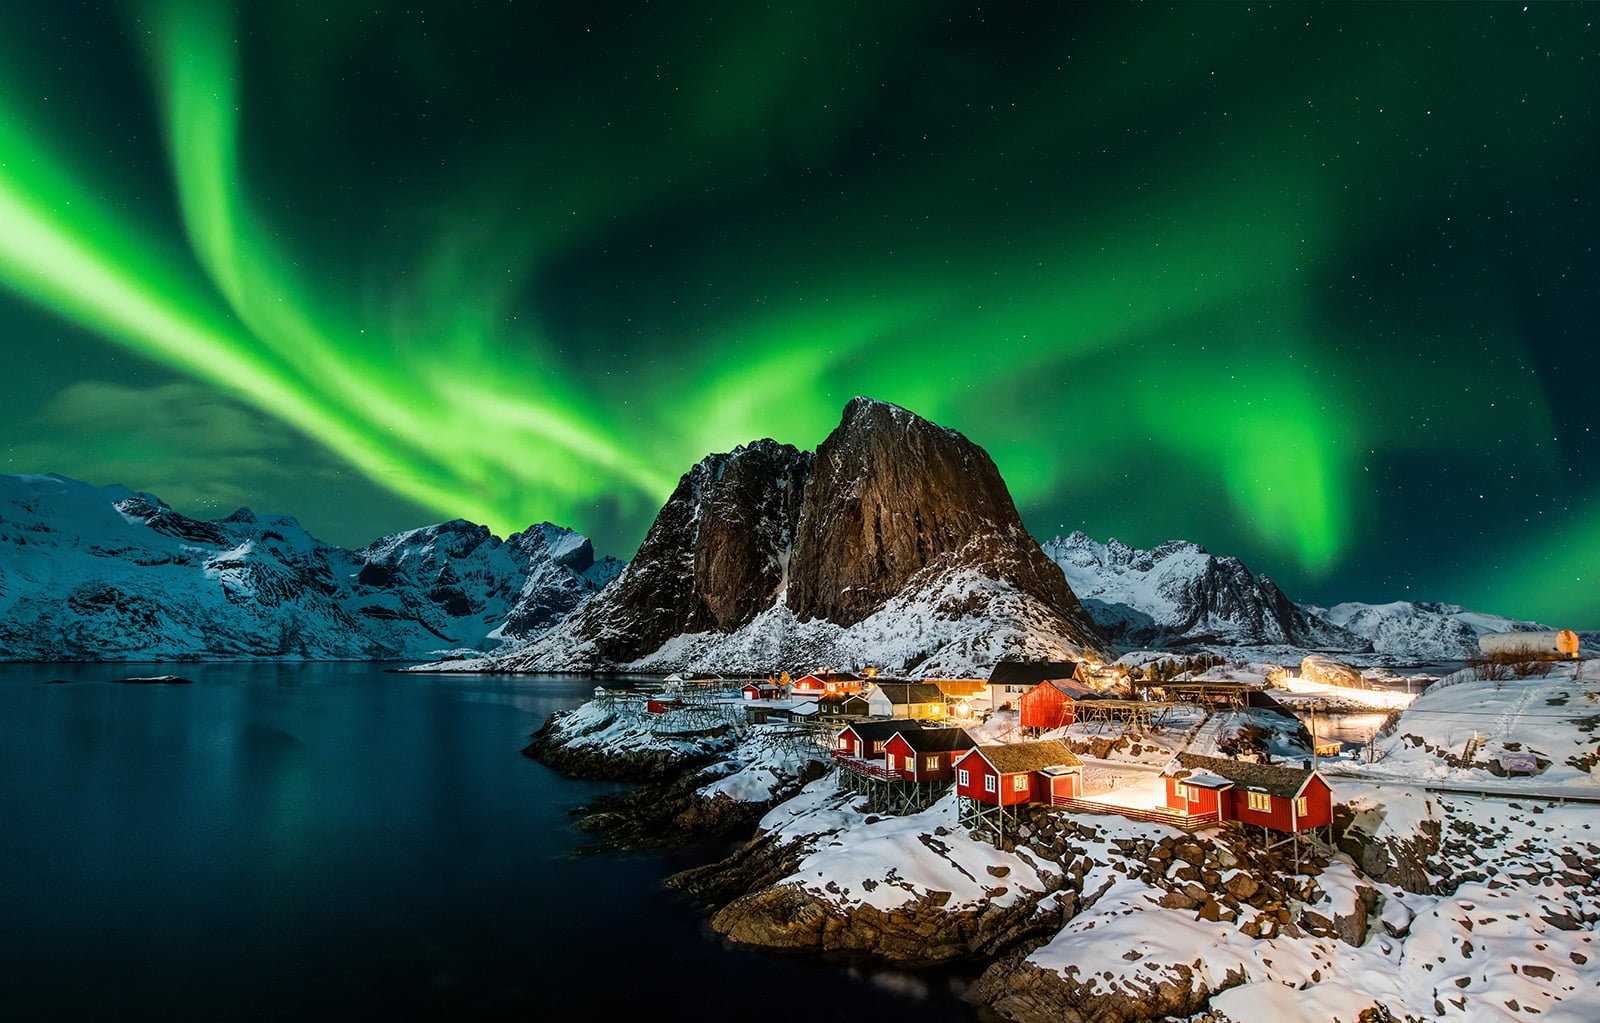 Tourists flock to the Lofoten Islands of Norway